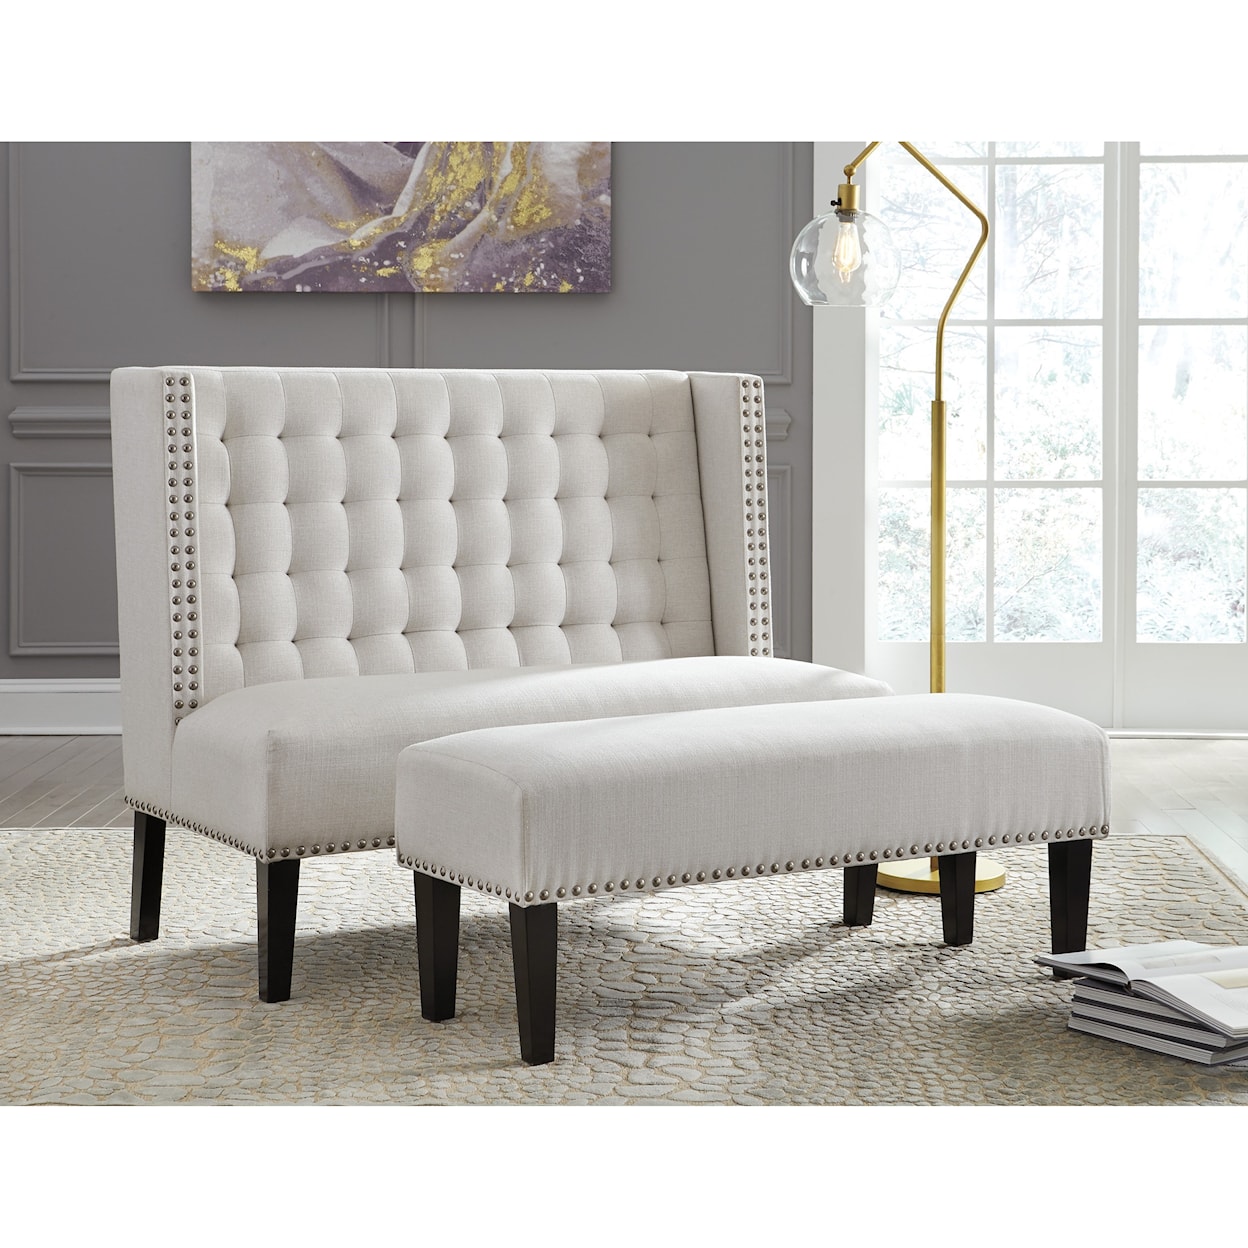 Signature Design by Ashley Beauland Settee and Bench